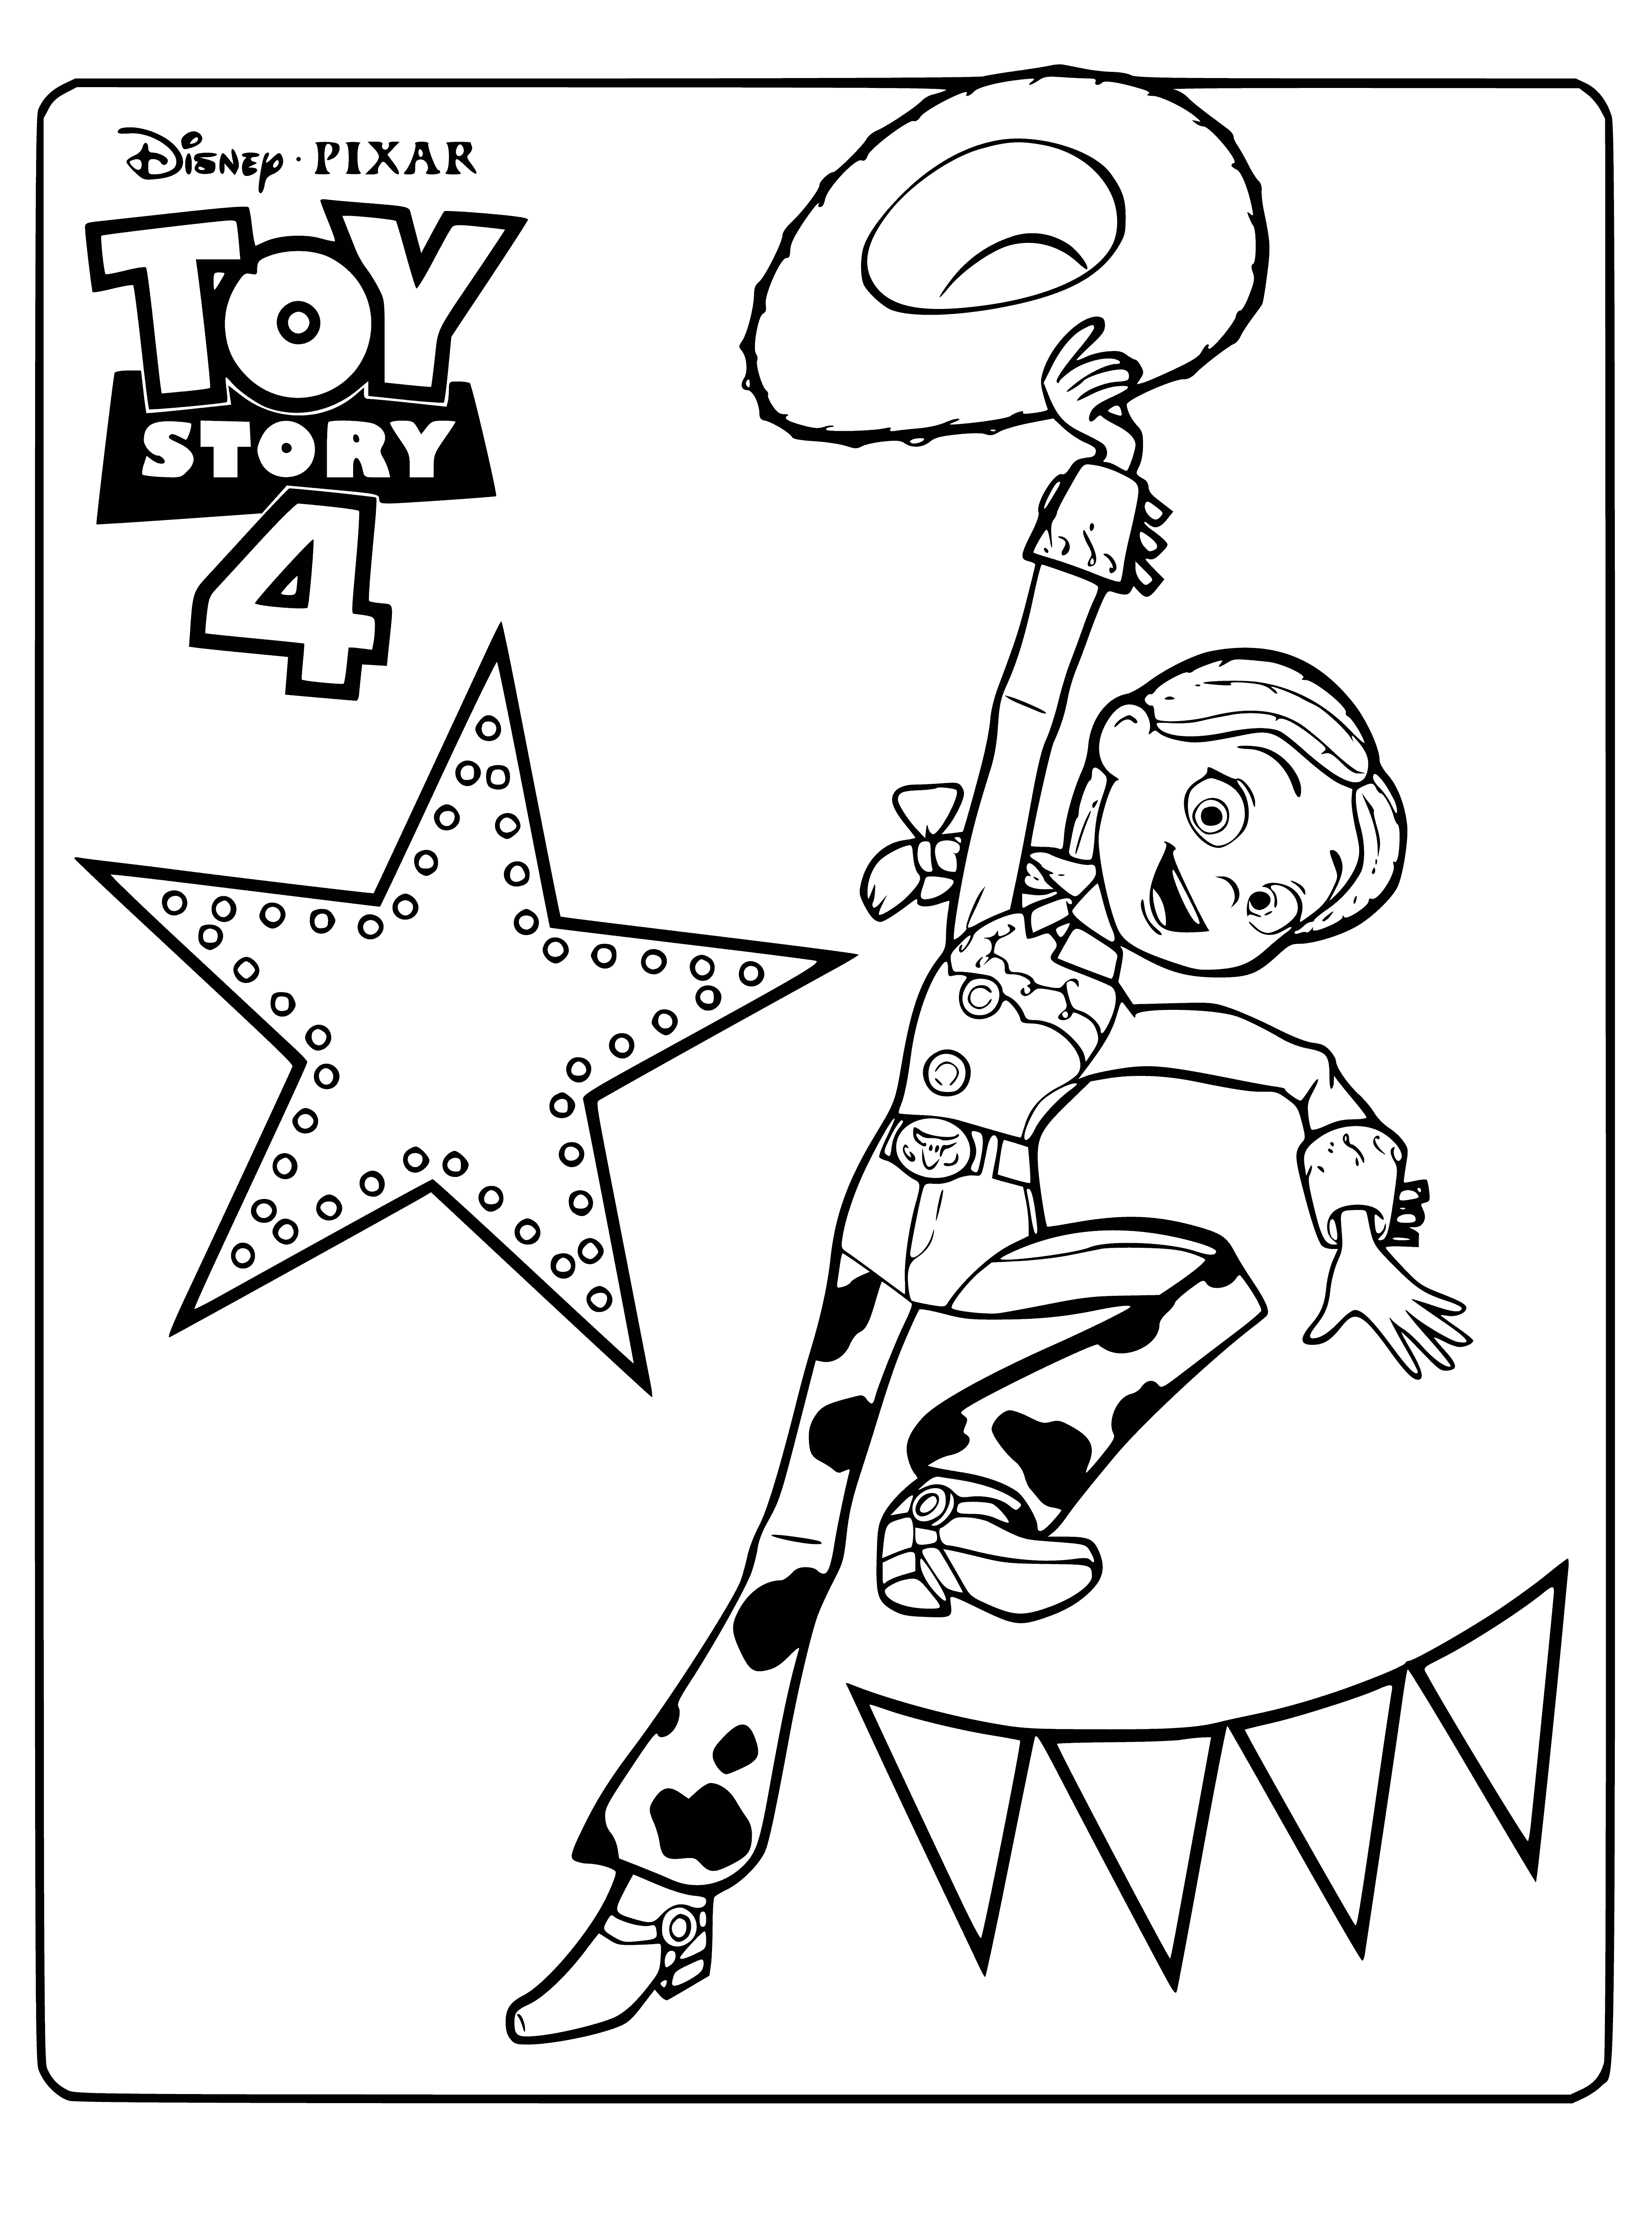 coloring page: Toy cowgirl Jessie has yellow hair, blue/white shirt, brown hat, holding a lasso - featured in coloring page.